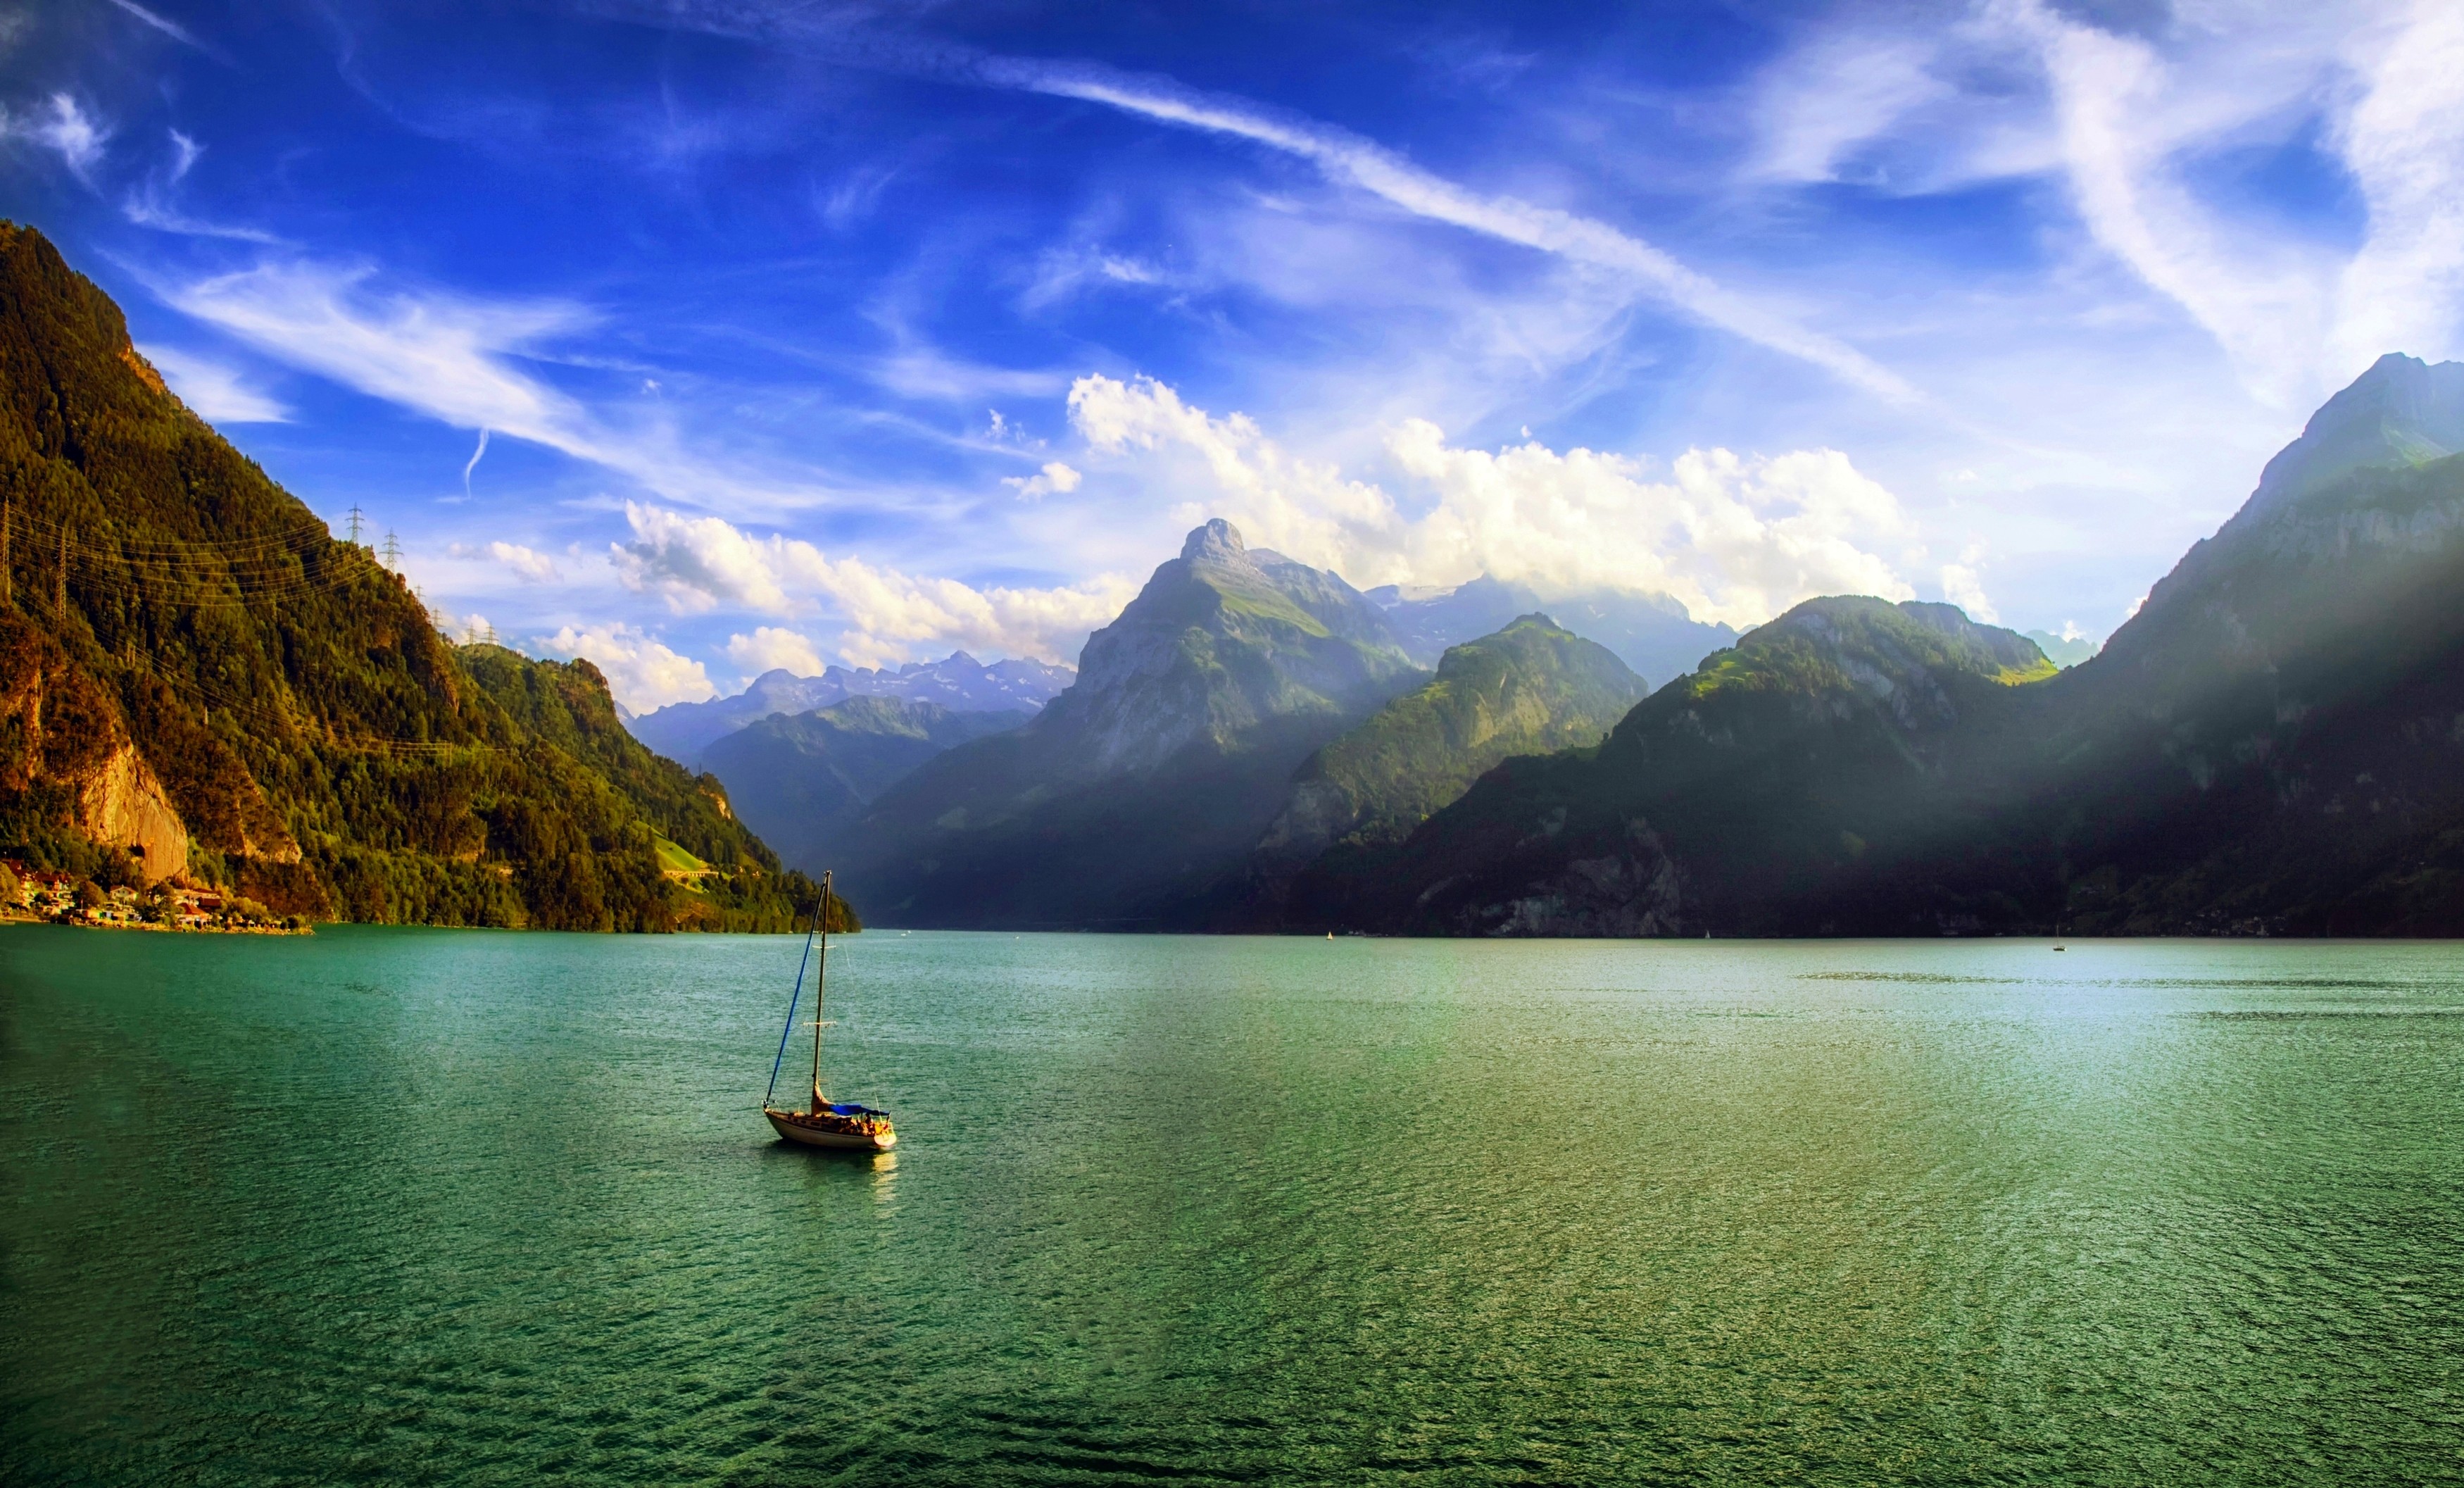 General 3500x2113 nature landscape mountains lake clouds mist morning Alps Switzerland sailboats sun rays water